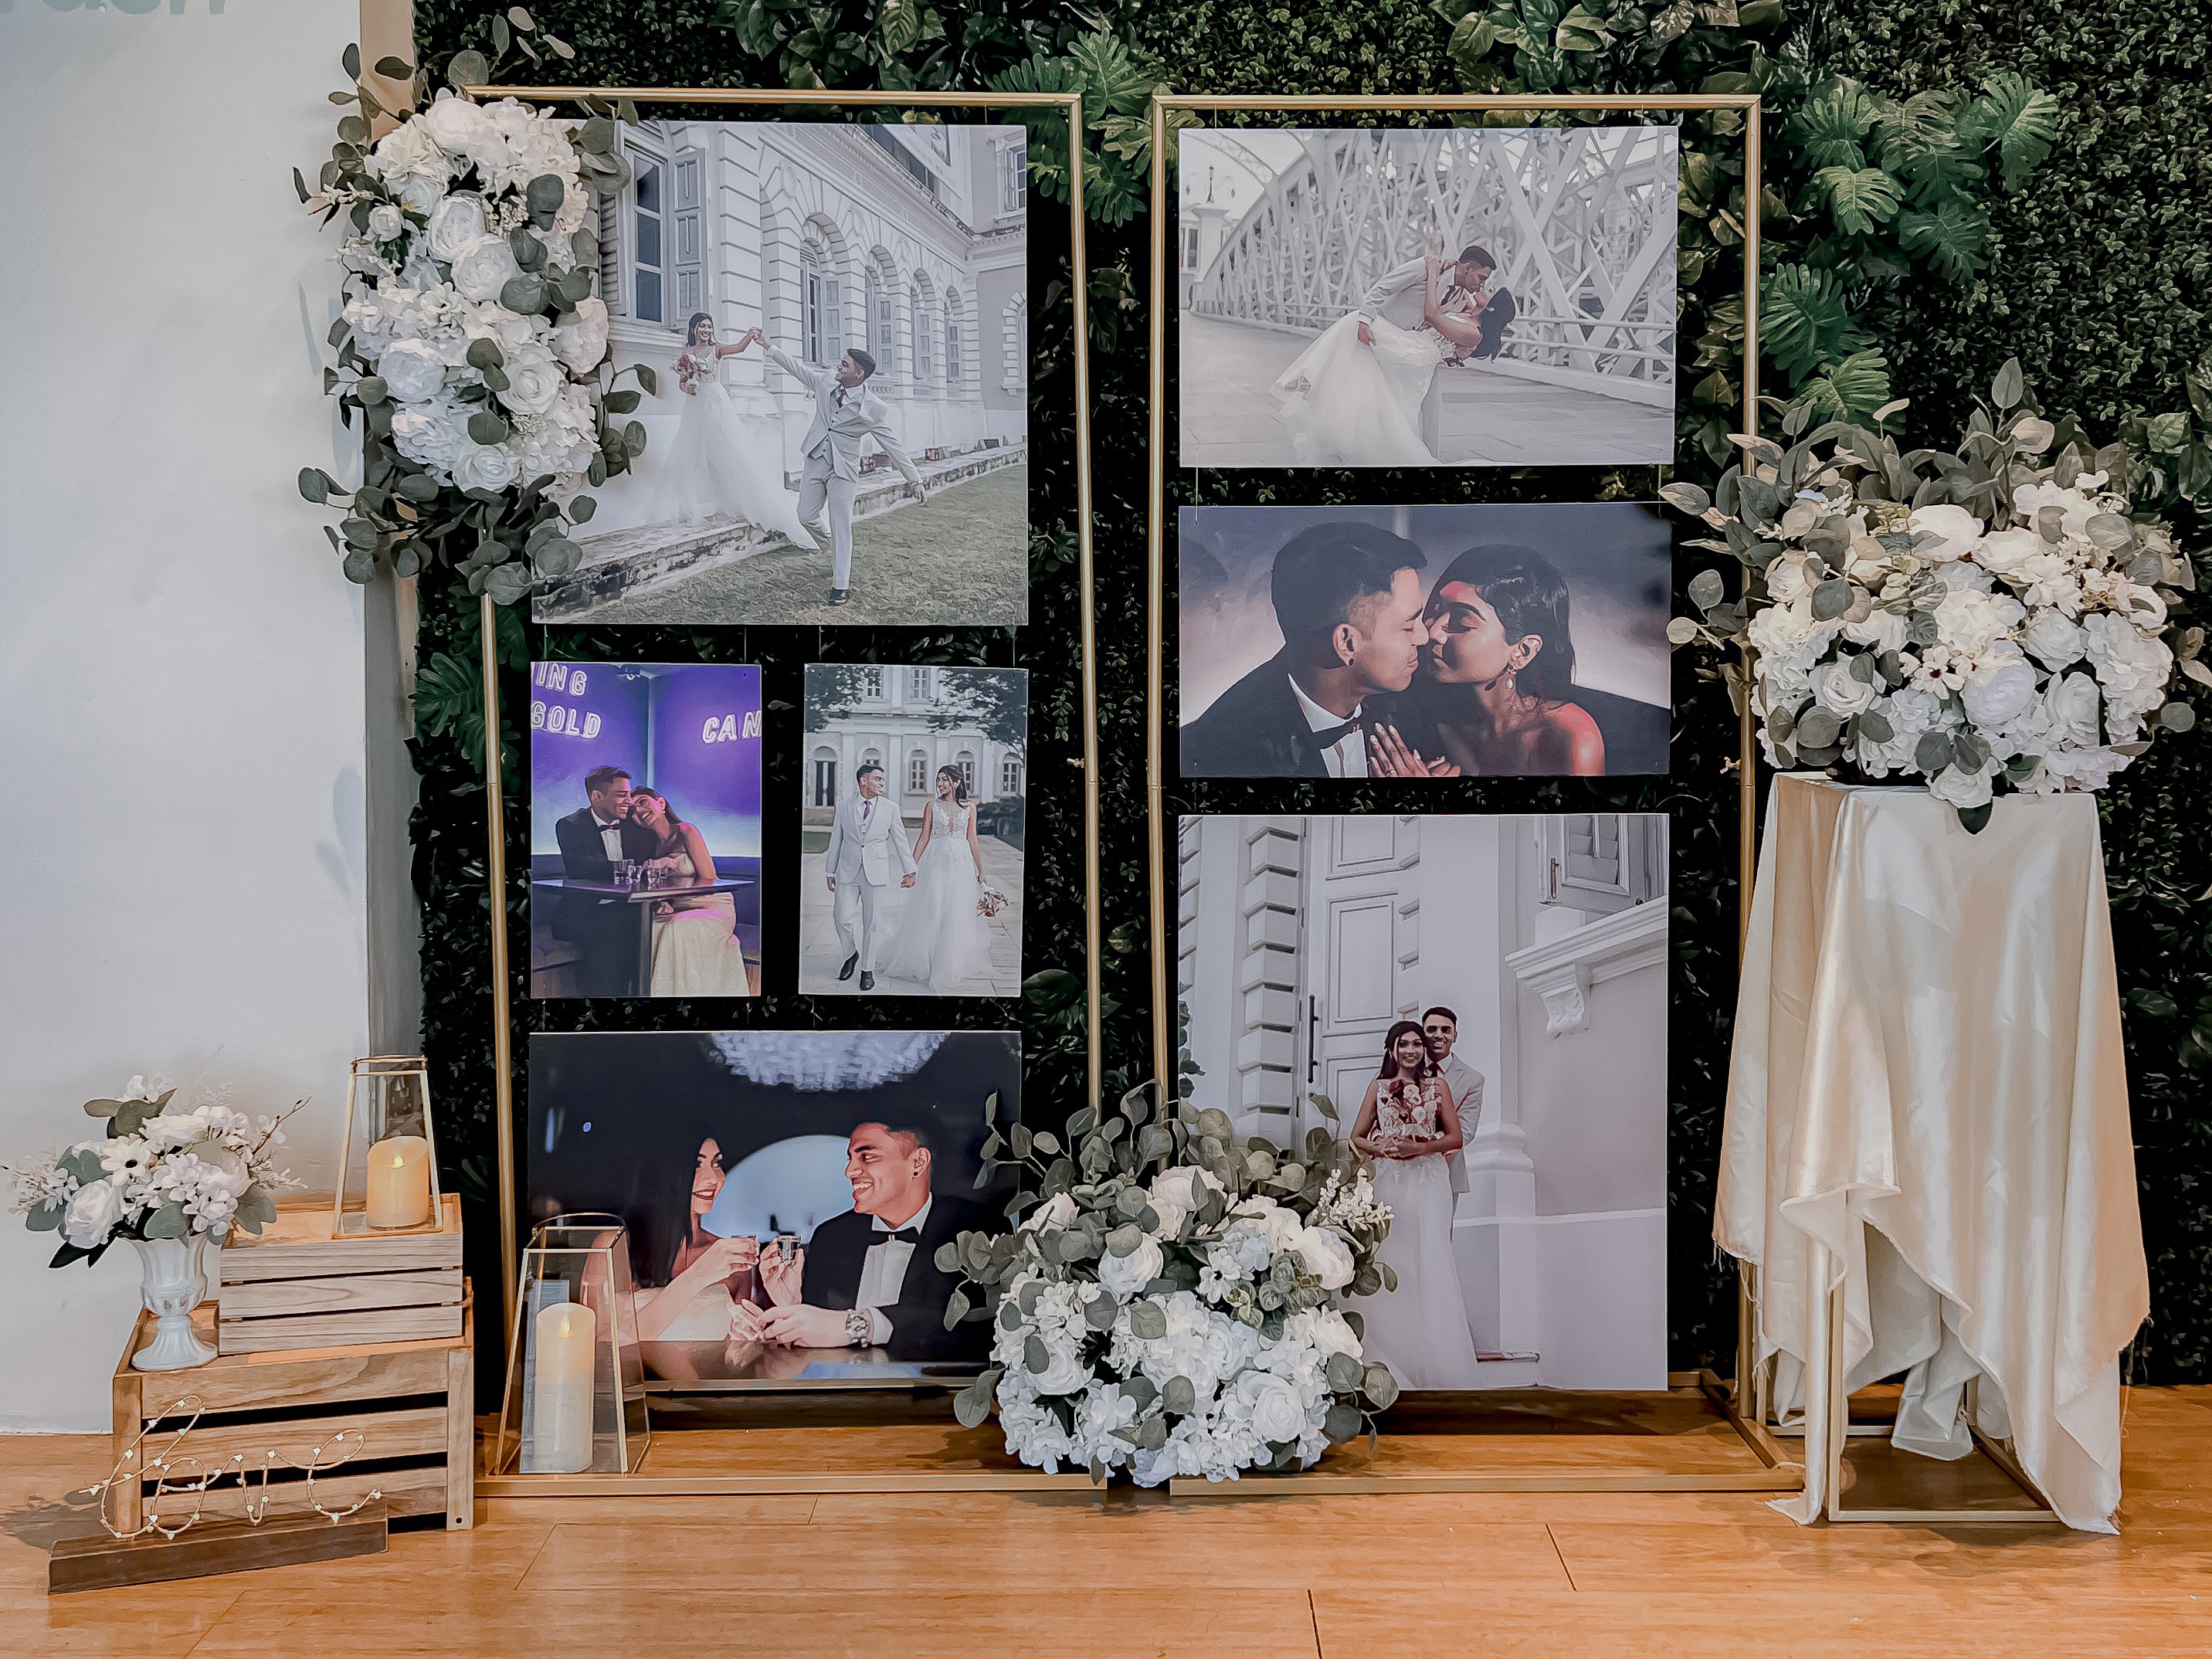 Wedding Reception Decor in Singapore - Multi-stands Photo Gallery with White Florals (Venue: Sky Garden Sentosa)